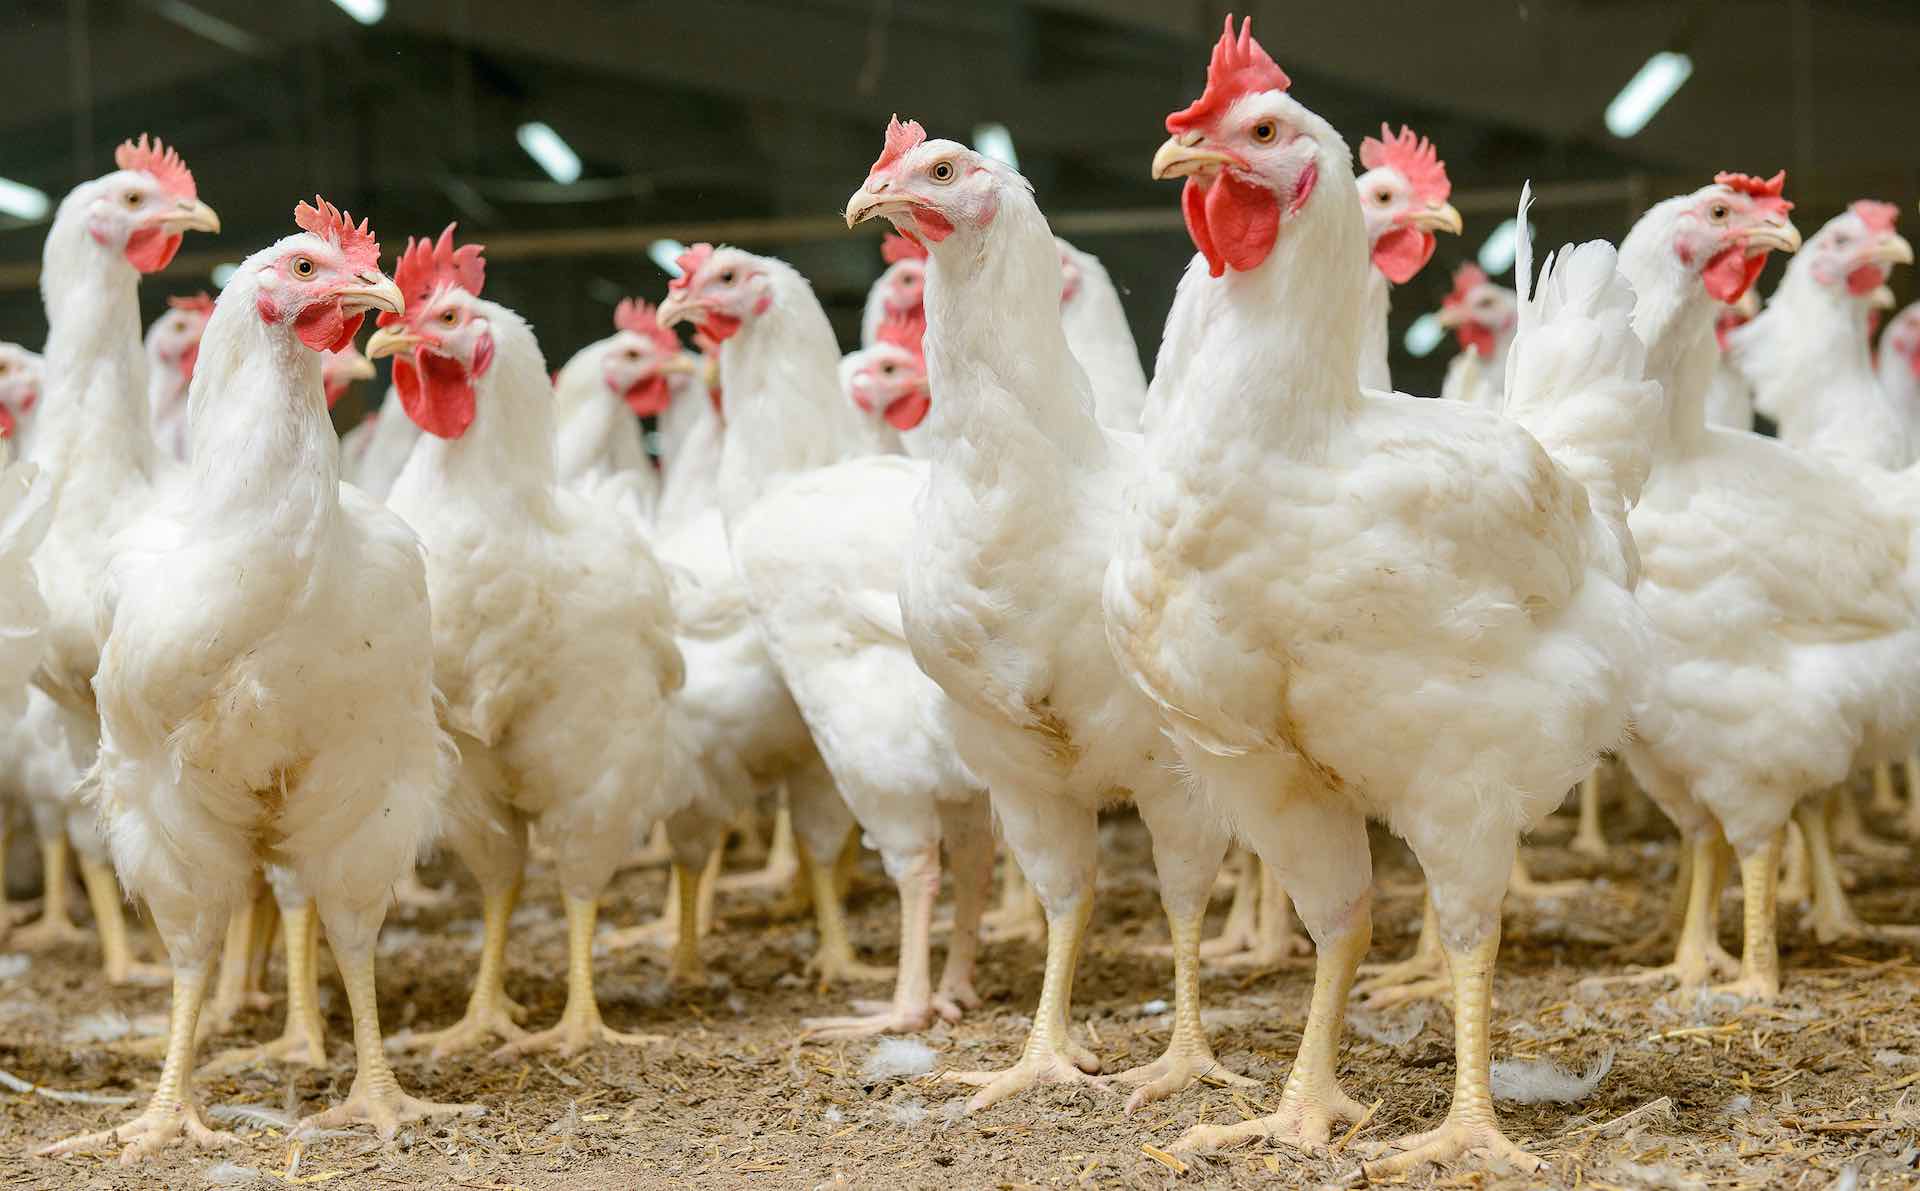 Bird flu outbreak reported on a small farm in South Africa